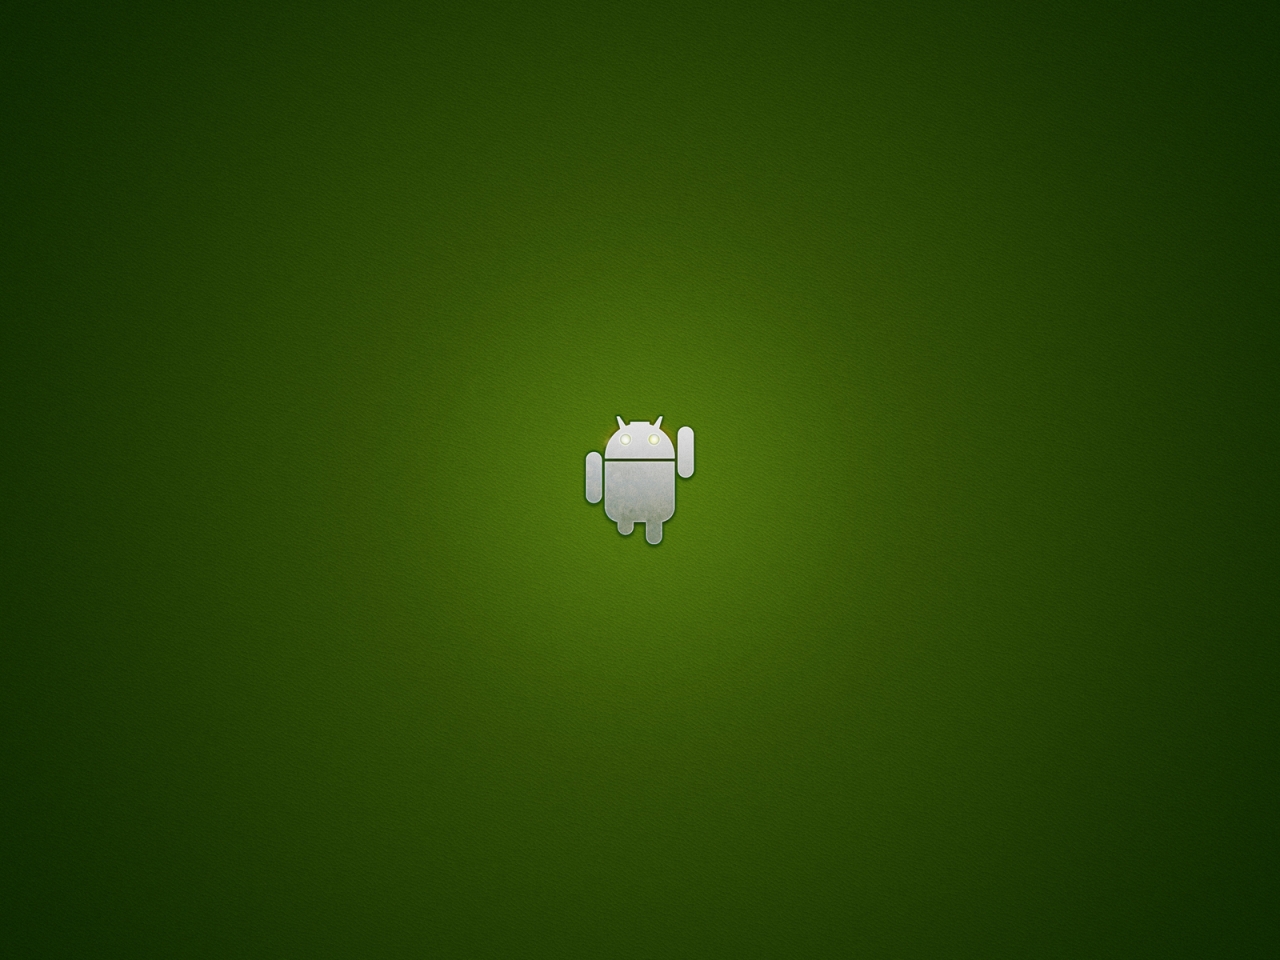 Just Android for 1280 x 960 resolution